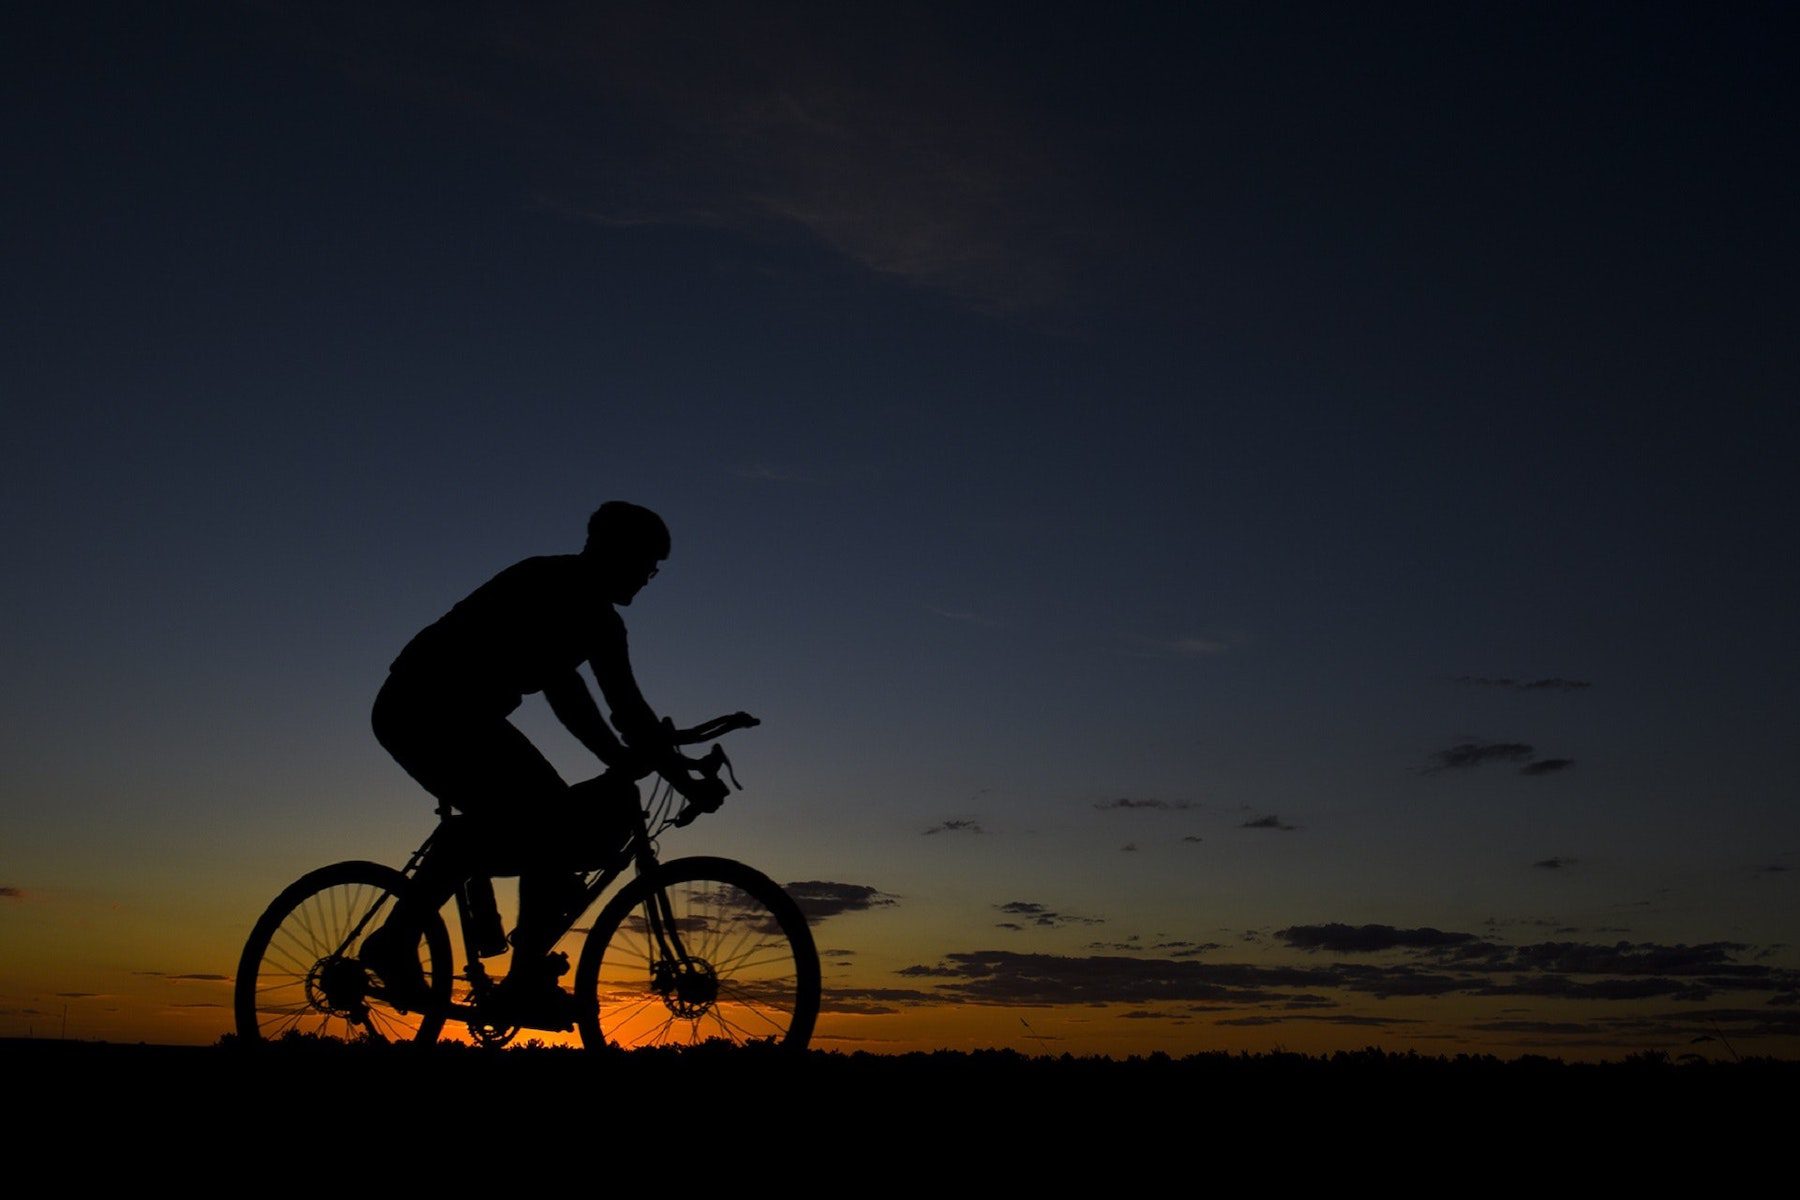 The silhouette of a cyclist on their bike during the sunset. 